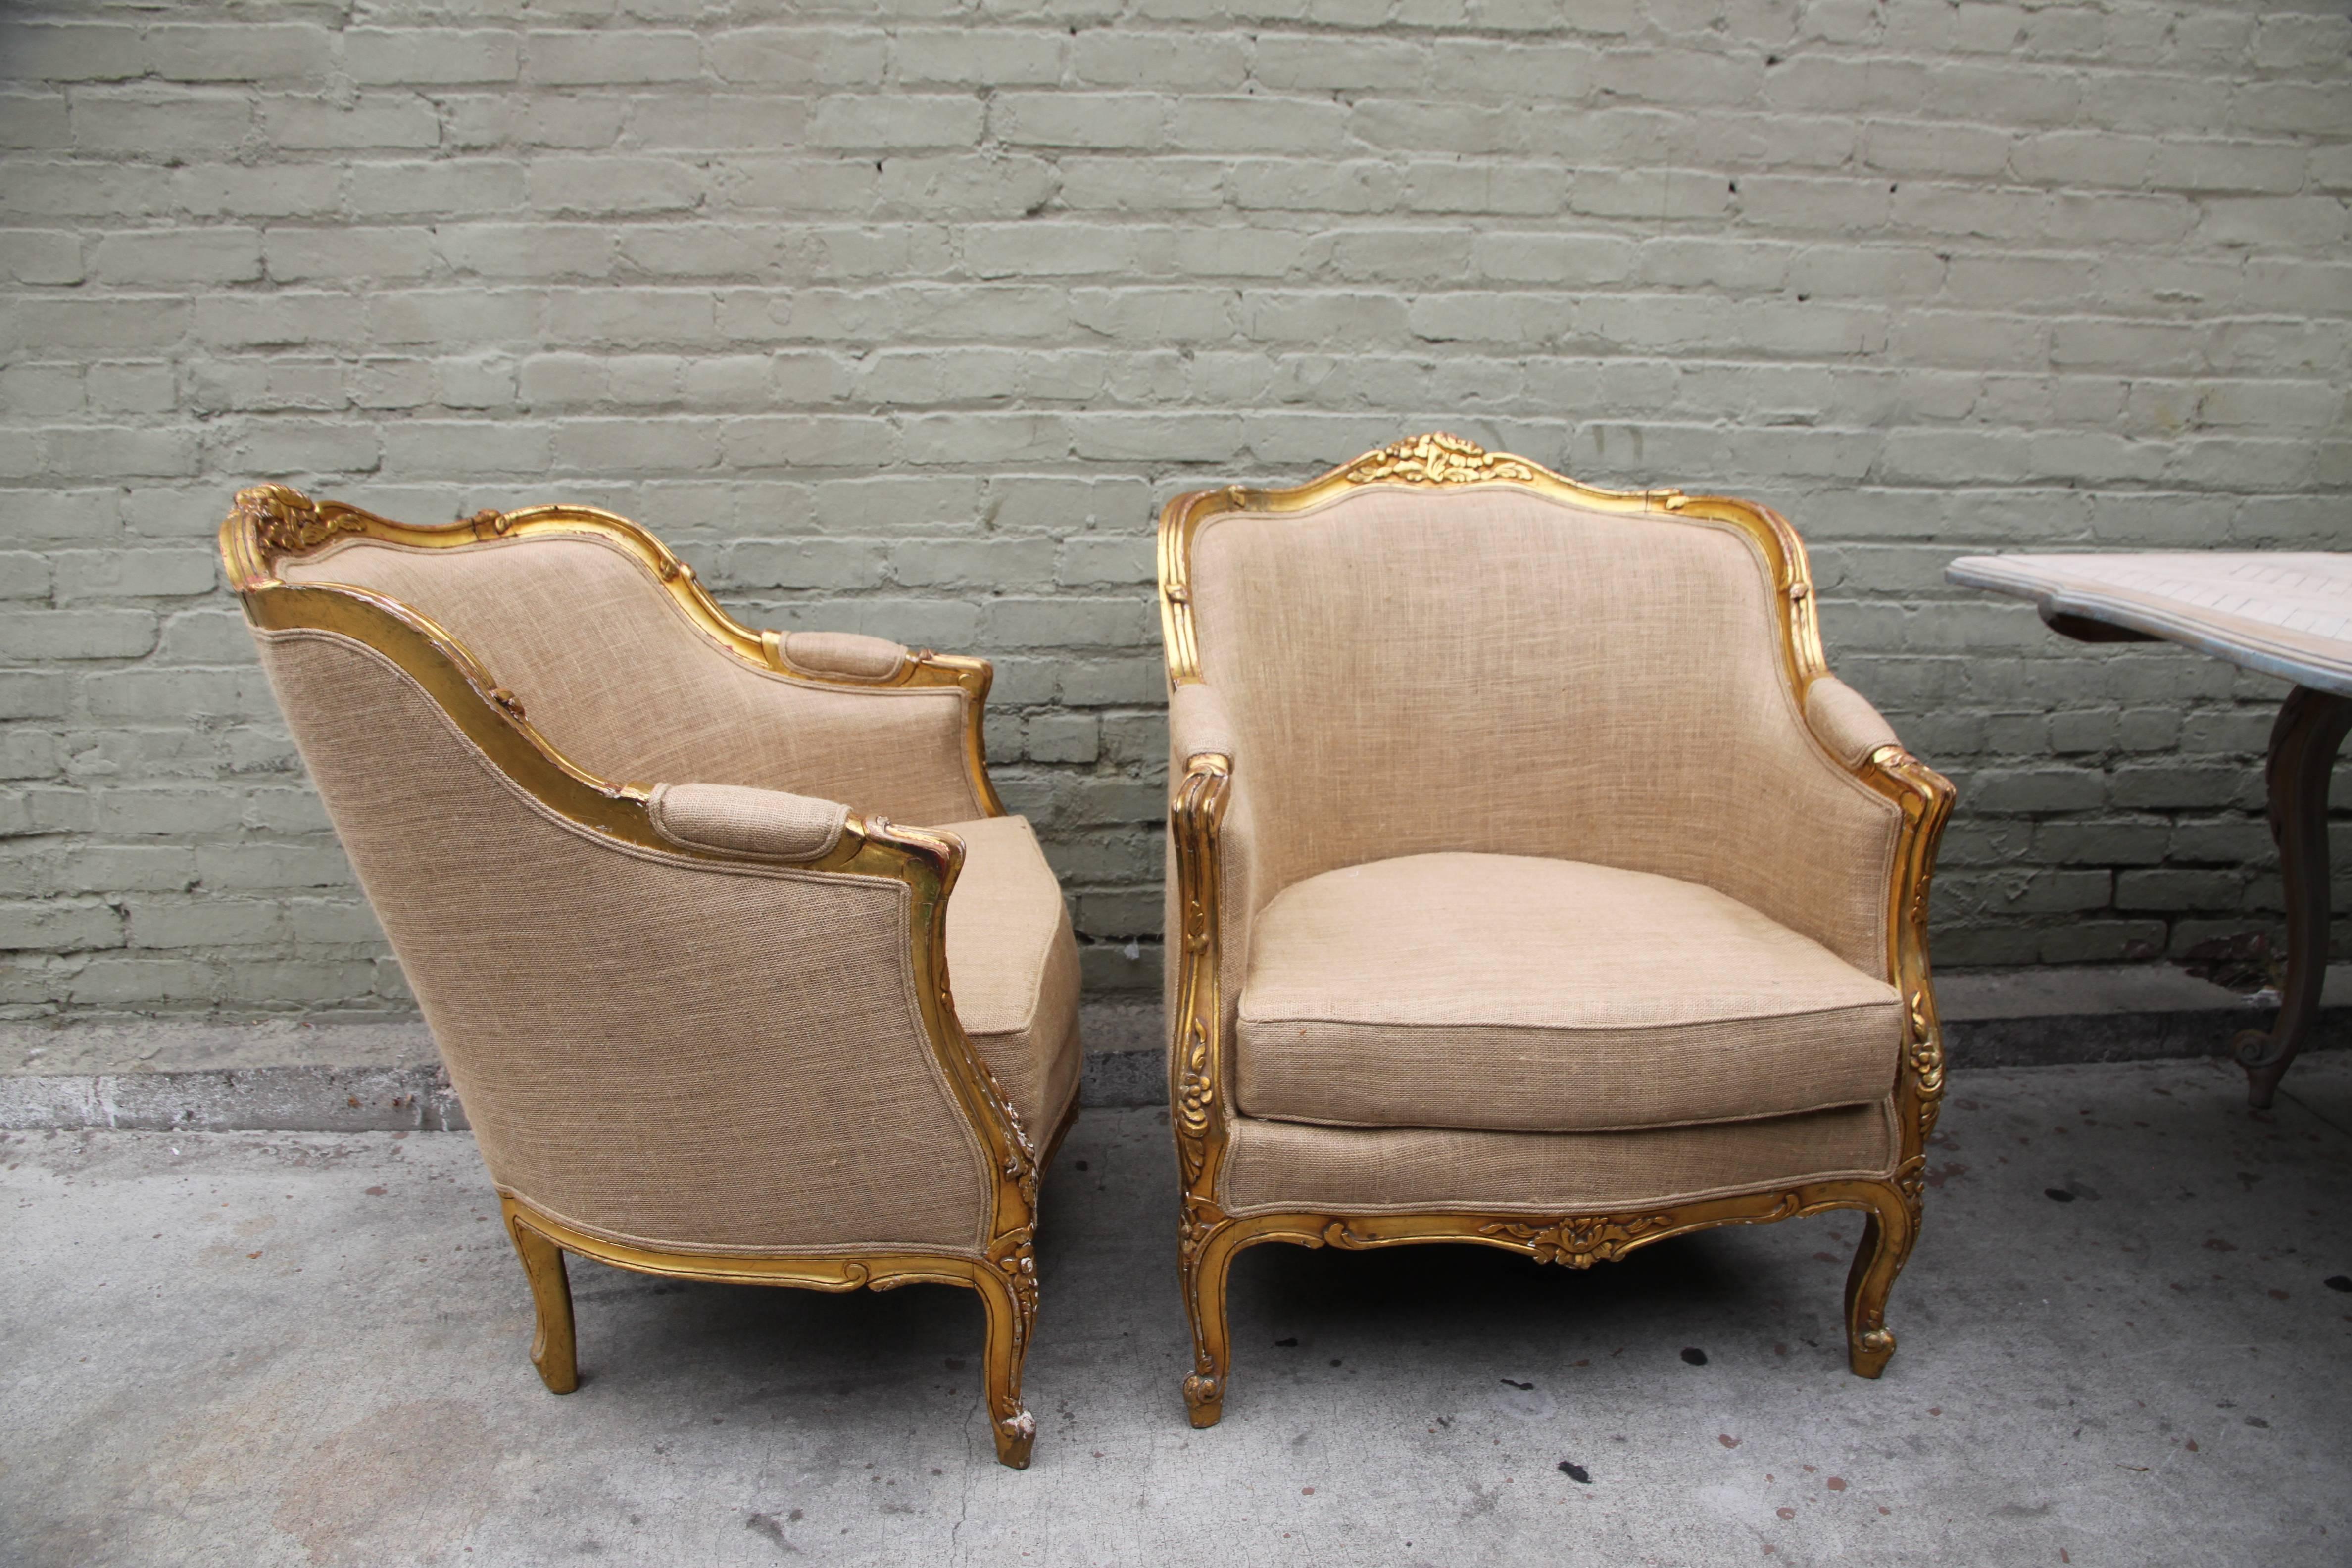 Pair of French gilt wood Louis XV style Bergeres newly upholstered in burlap with double piping self detail.